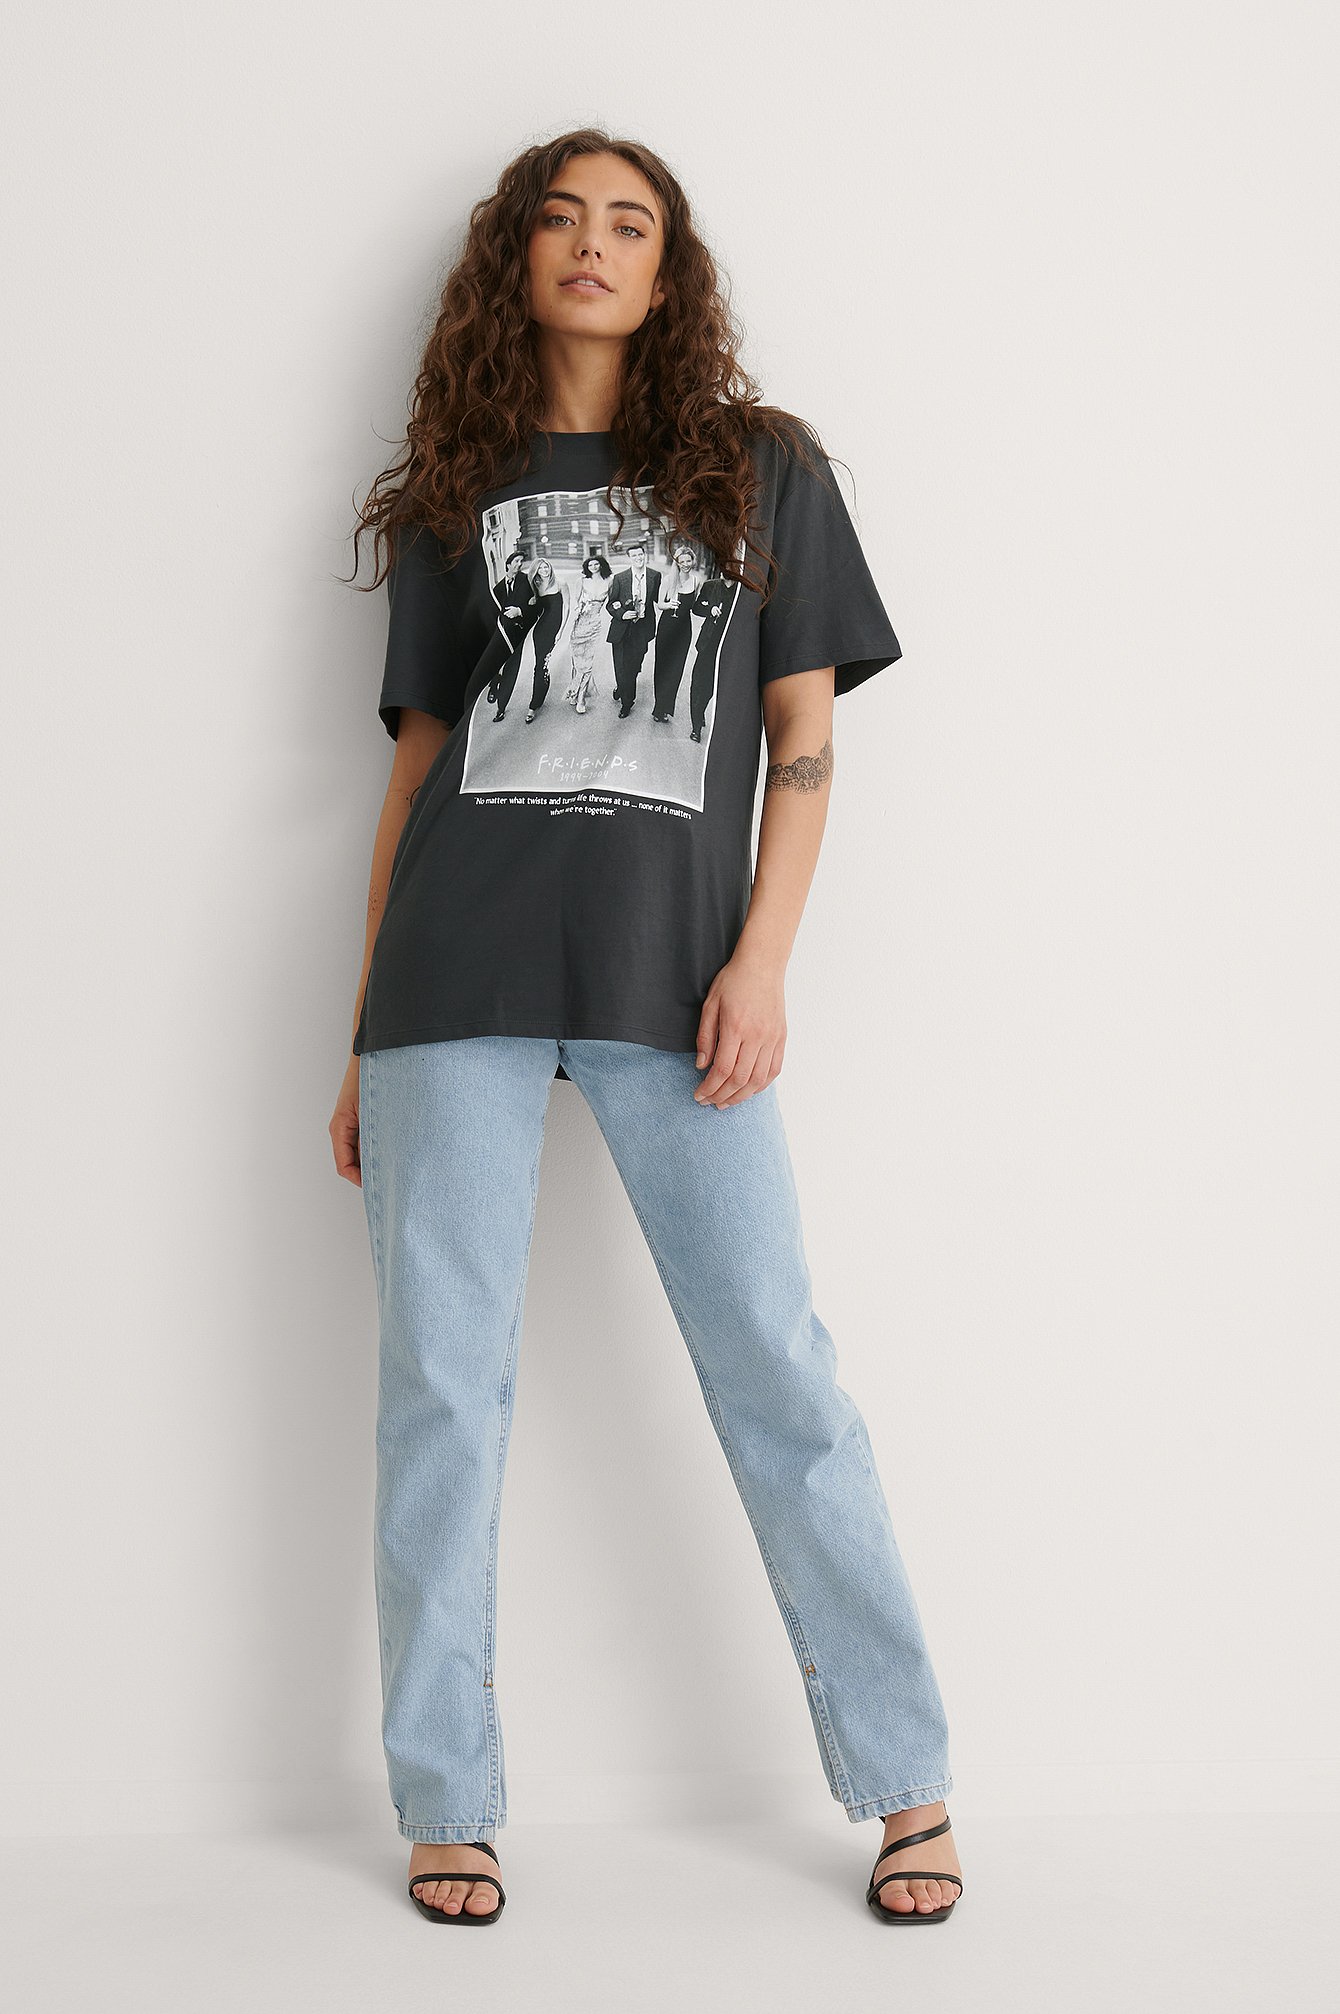 Friends Unisex Print Tee Outfit